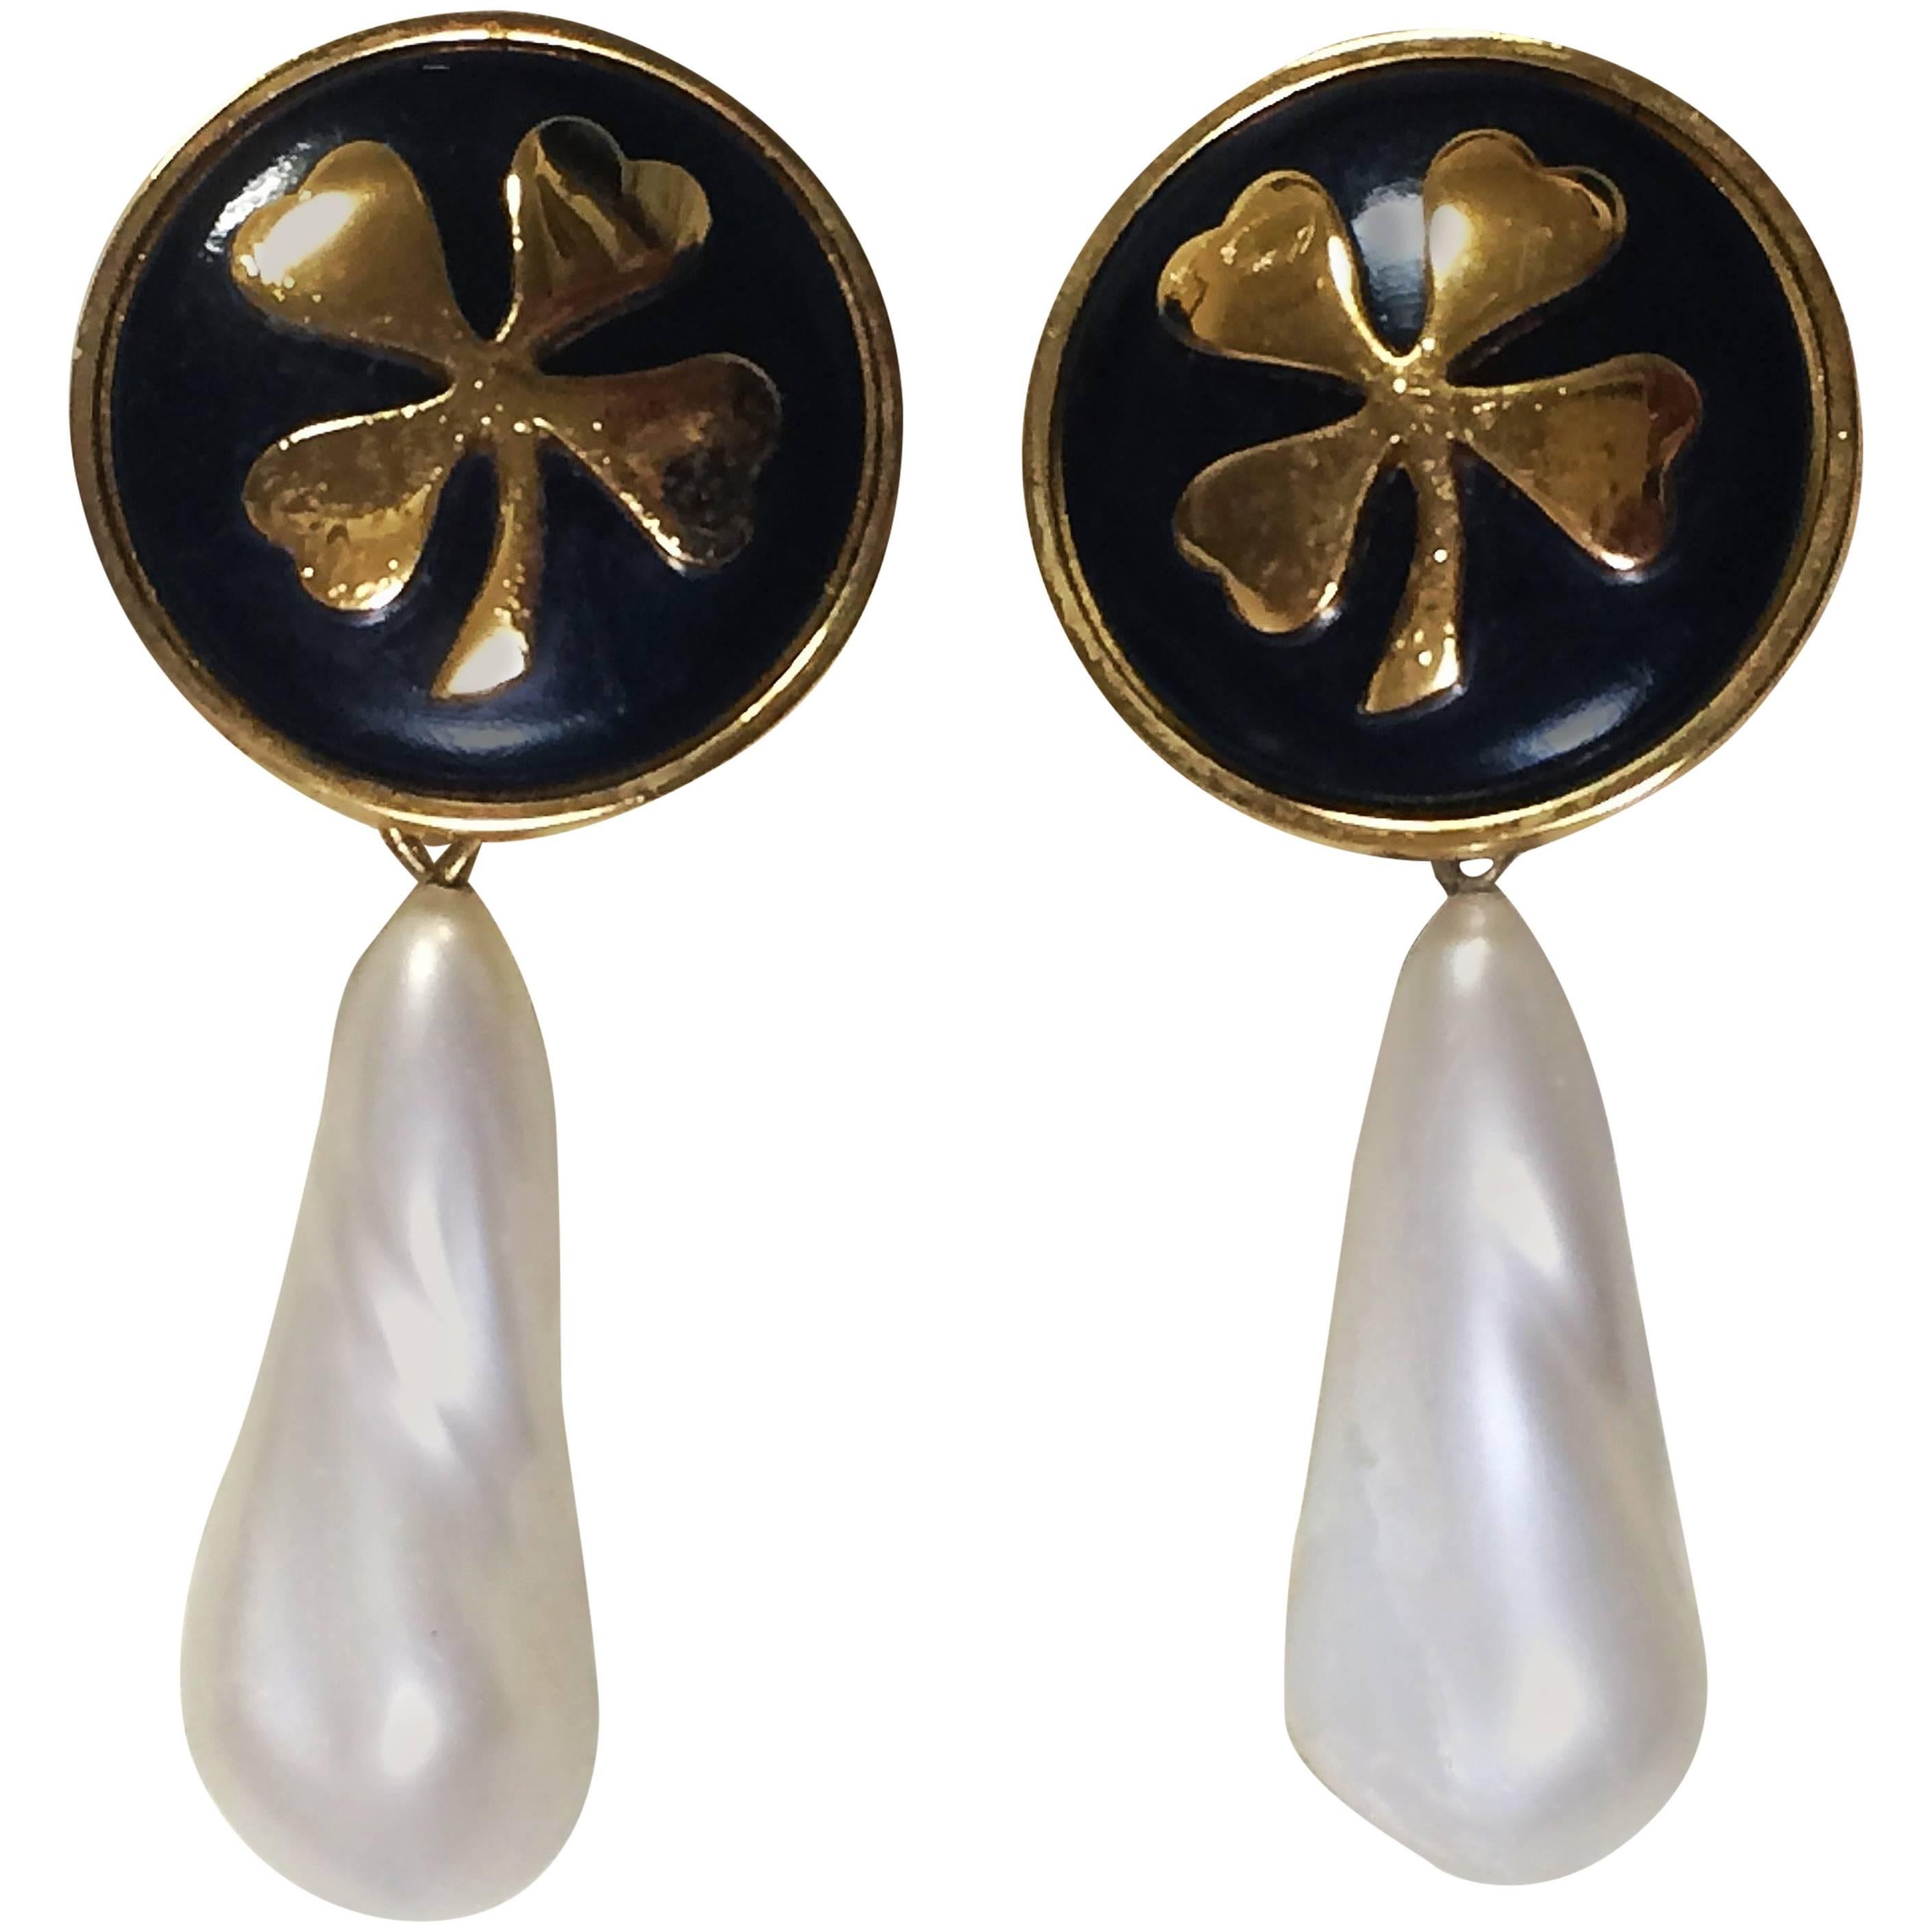 Vintage CHANEL white teardrop faux pearl earring with black and gold clover mark